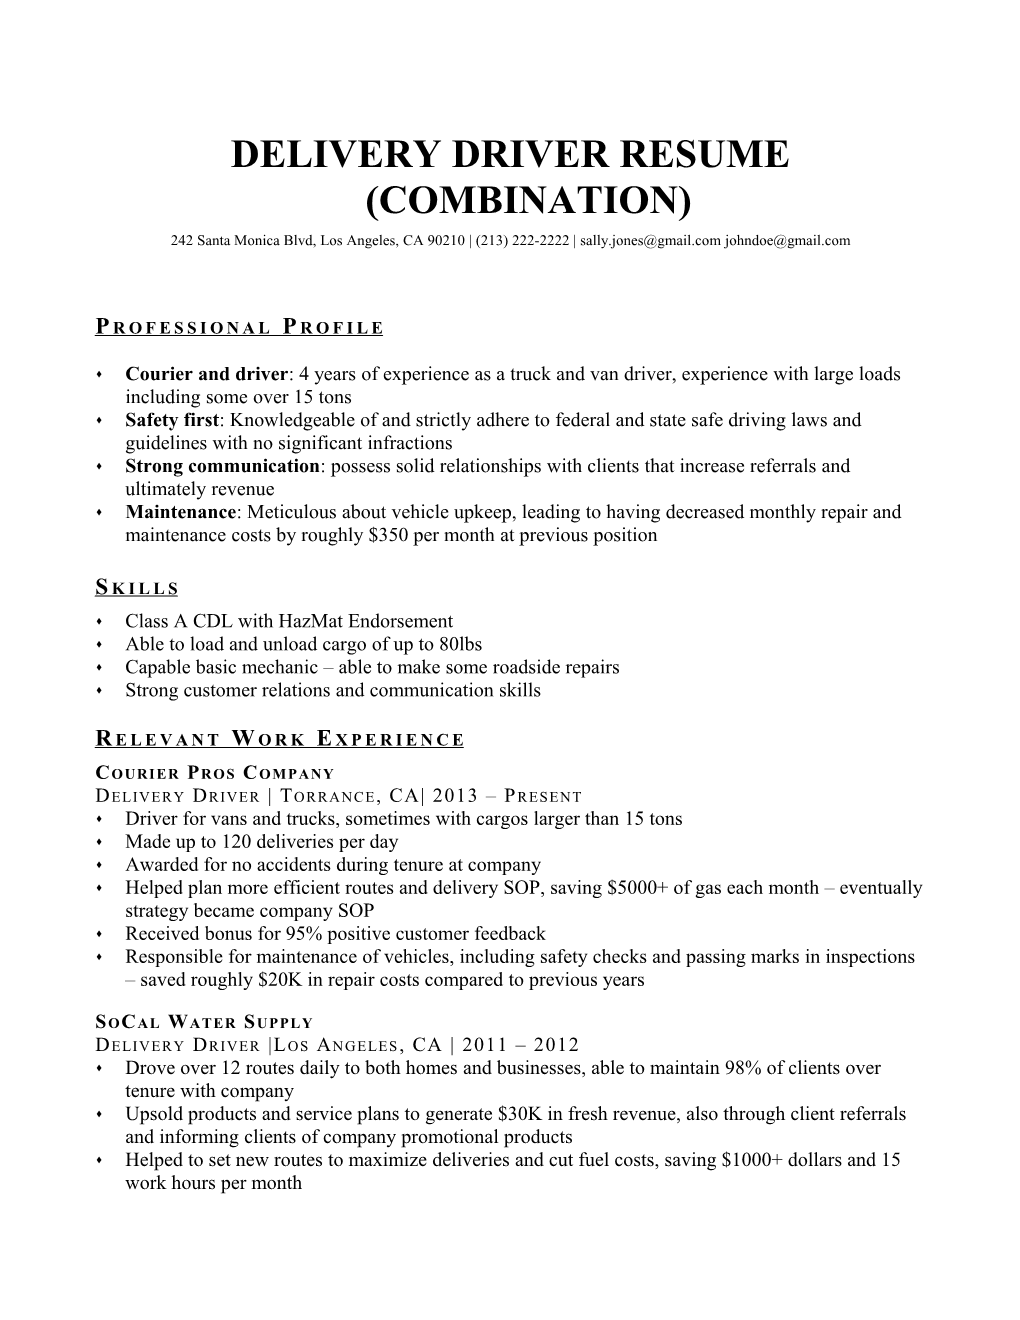 Delivery Driver Resume (Combination)